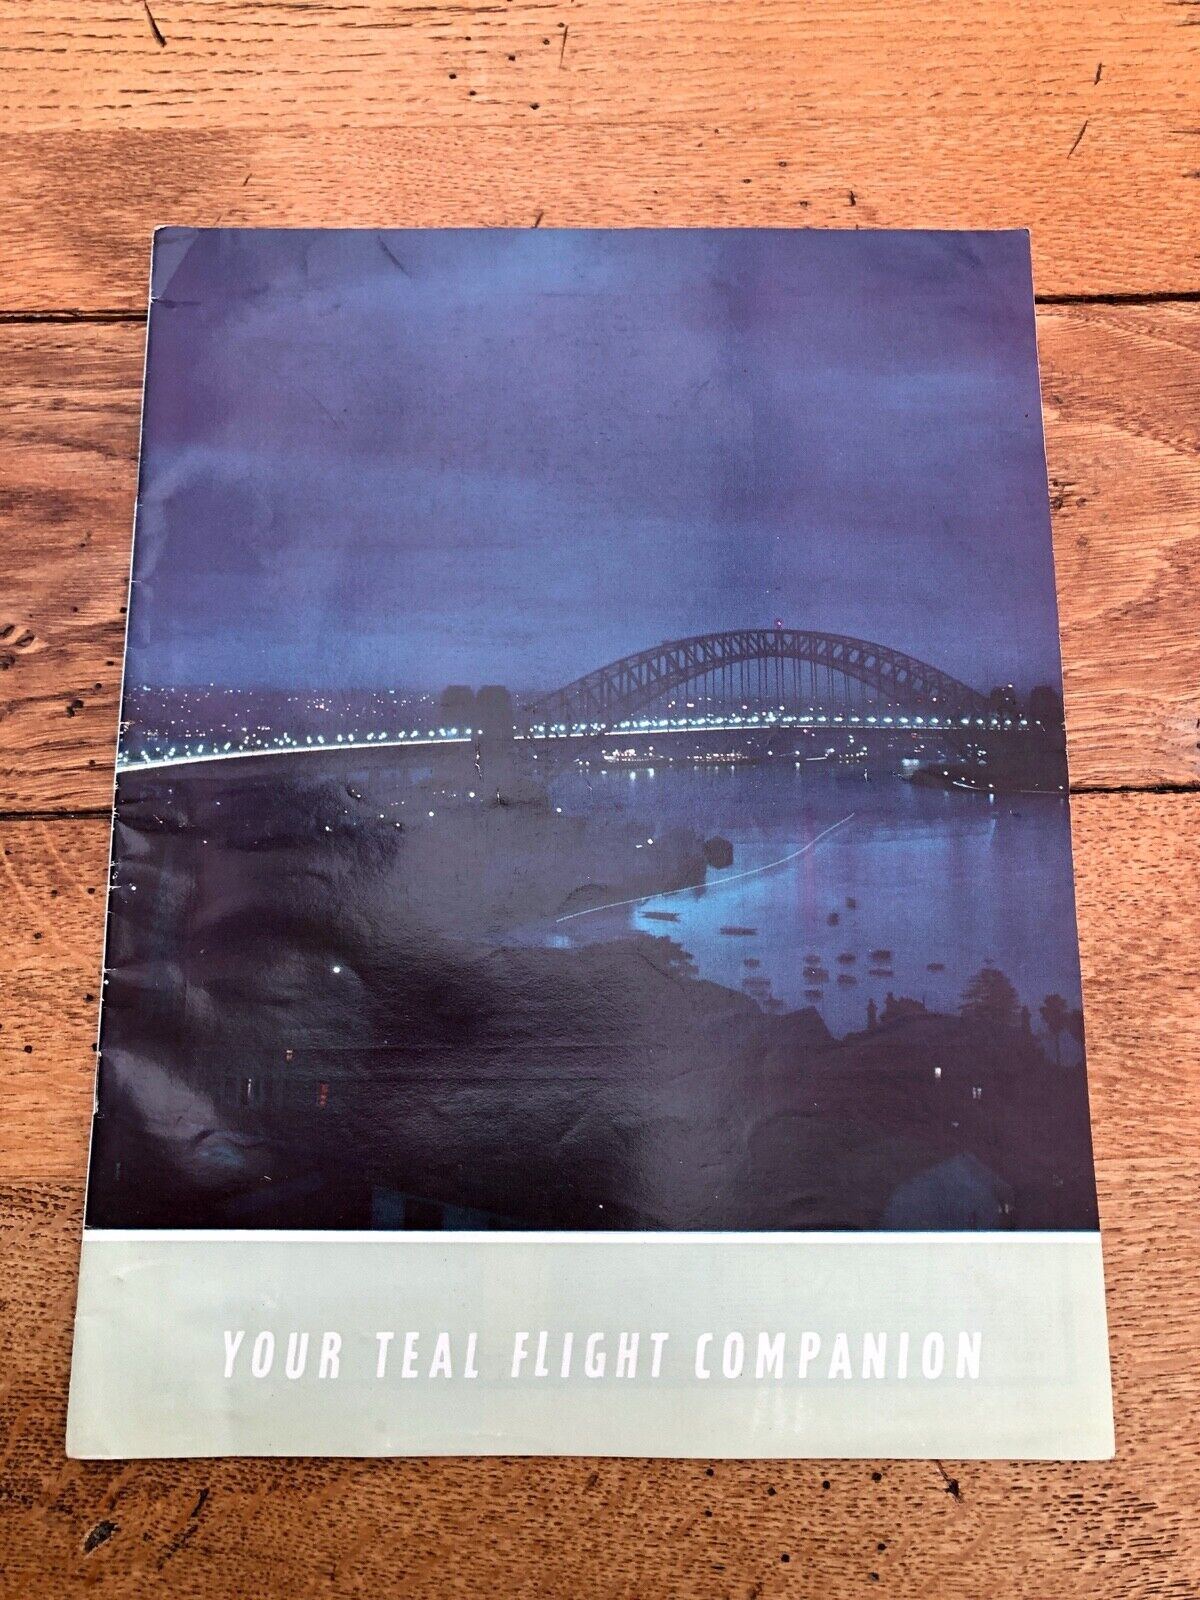 teal airlines flight companion magazine. 1960s ?